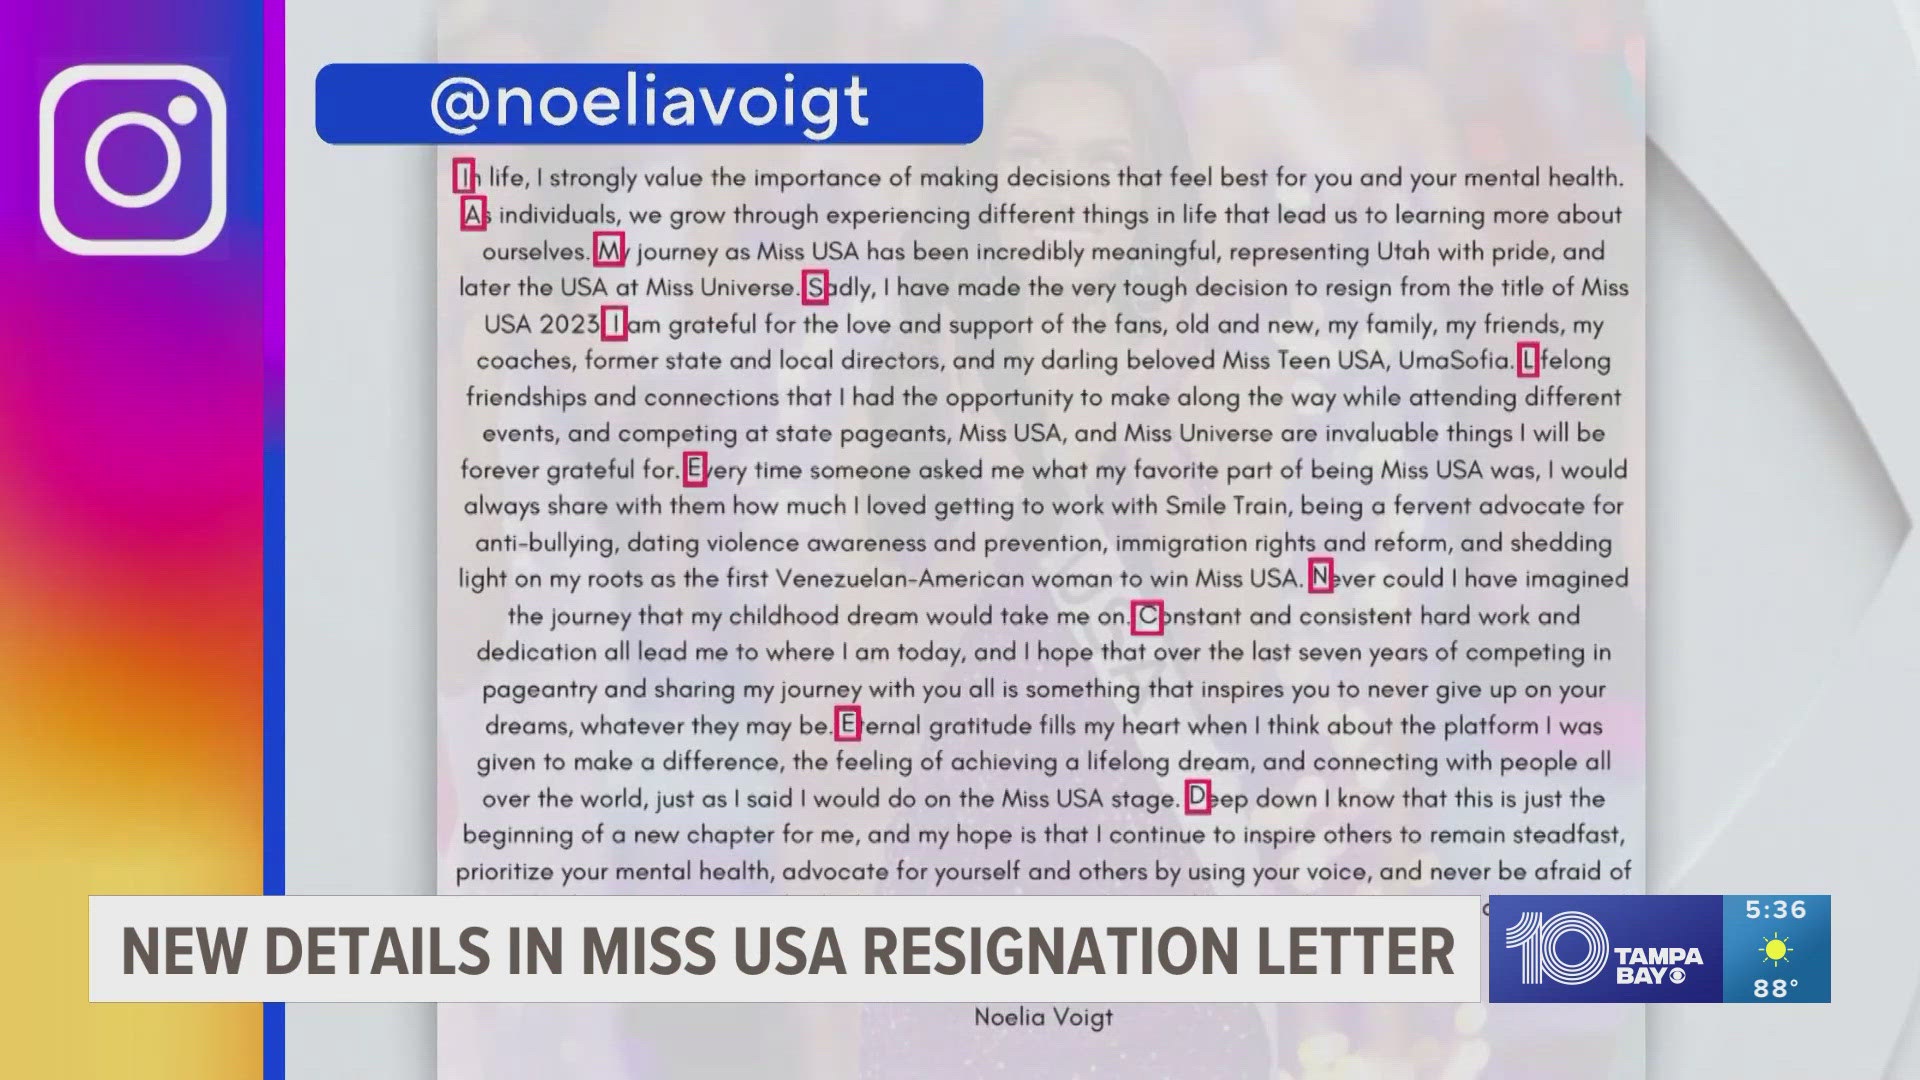 The news comes after Sarasota native and 2023 Miss USA winner Noelia Voigt gave up her crown Monday.